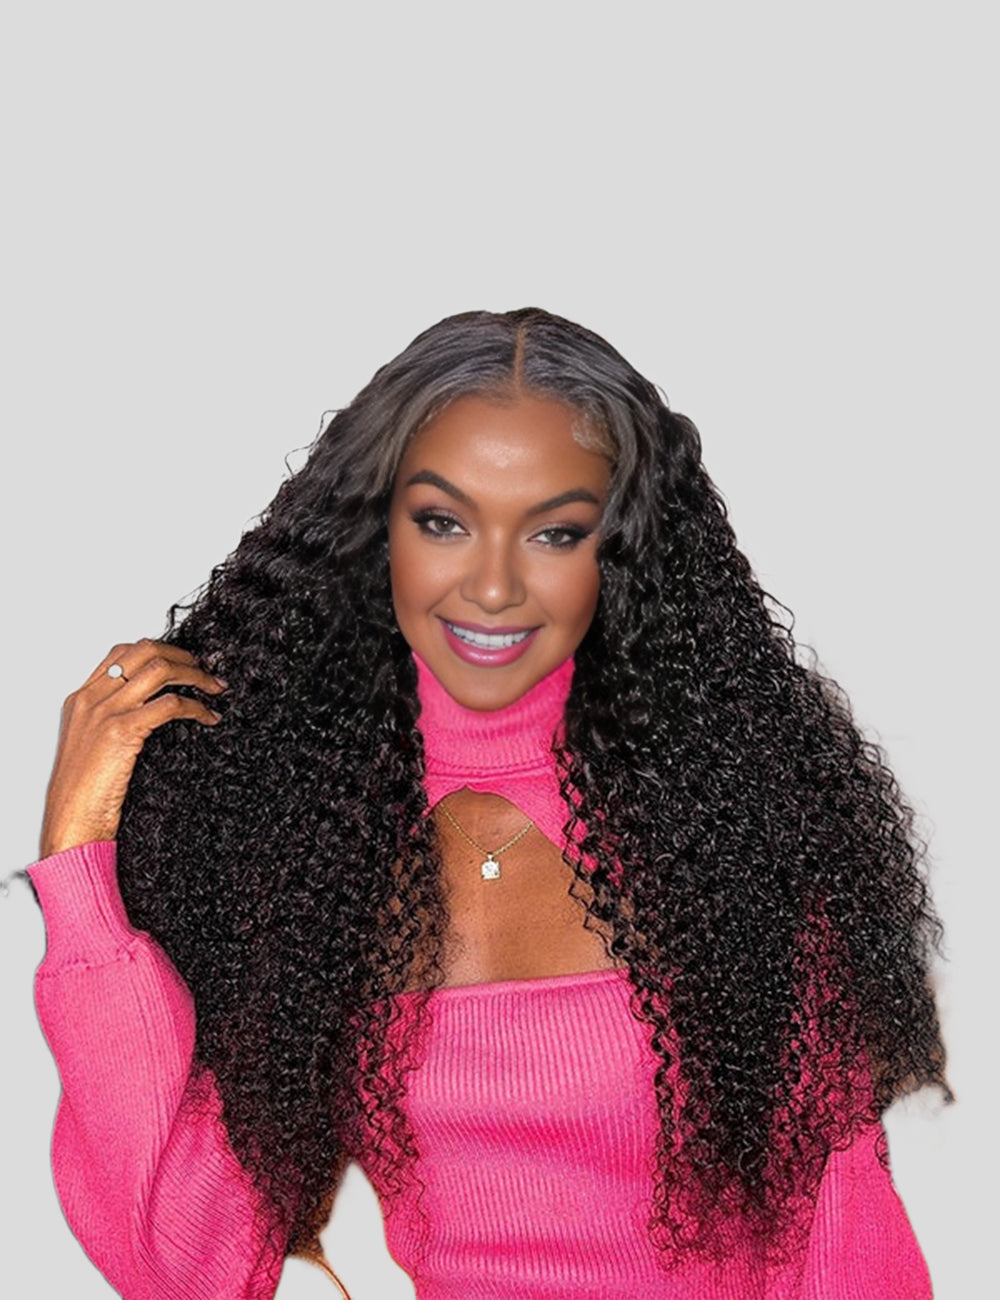 Invisible Knots Kinky Curly Wear Go Wig 13x6 HD Lace Frontal Wigs Pre Cut Wigs Pre Plucked